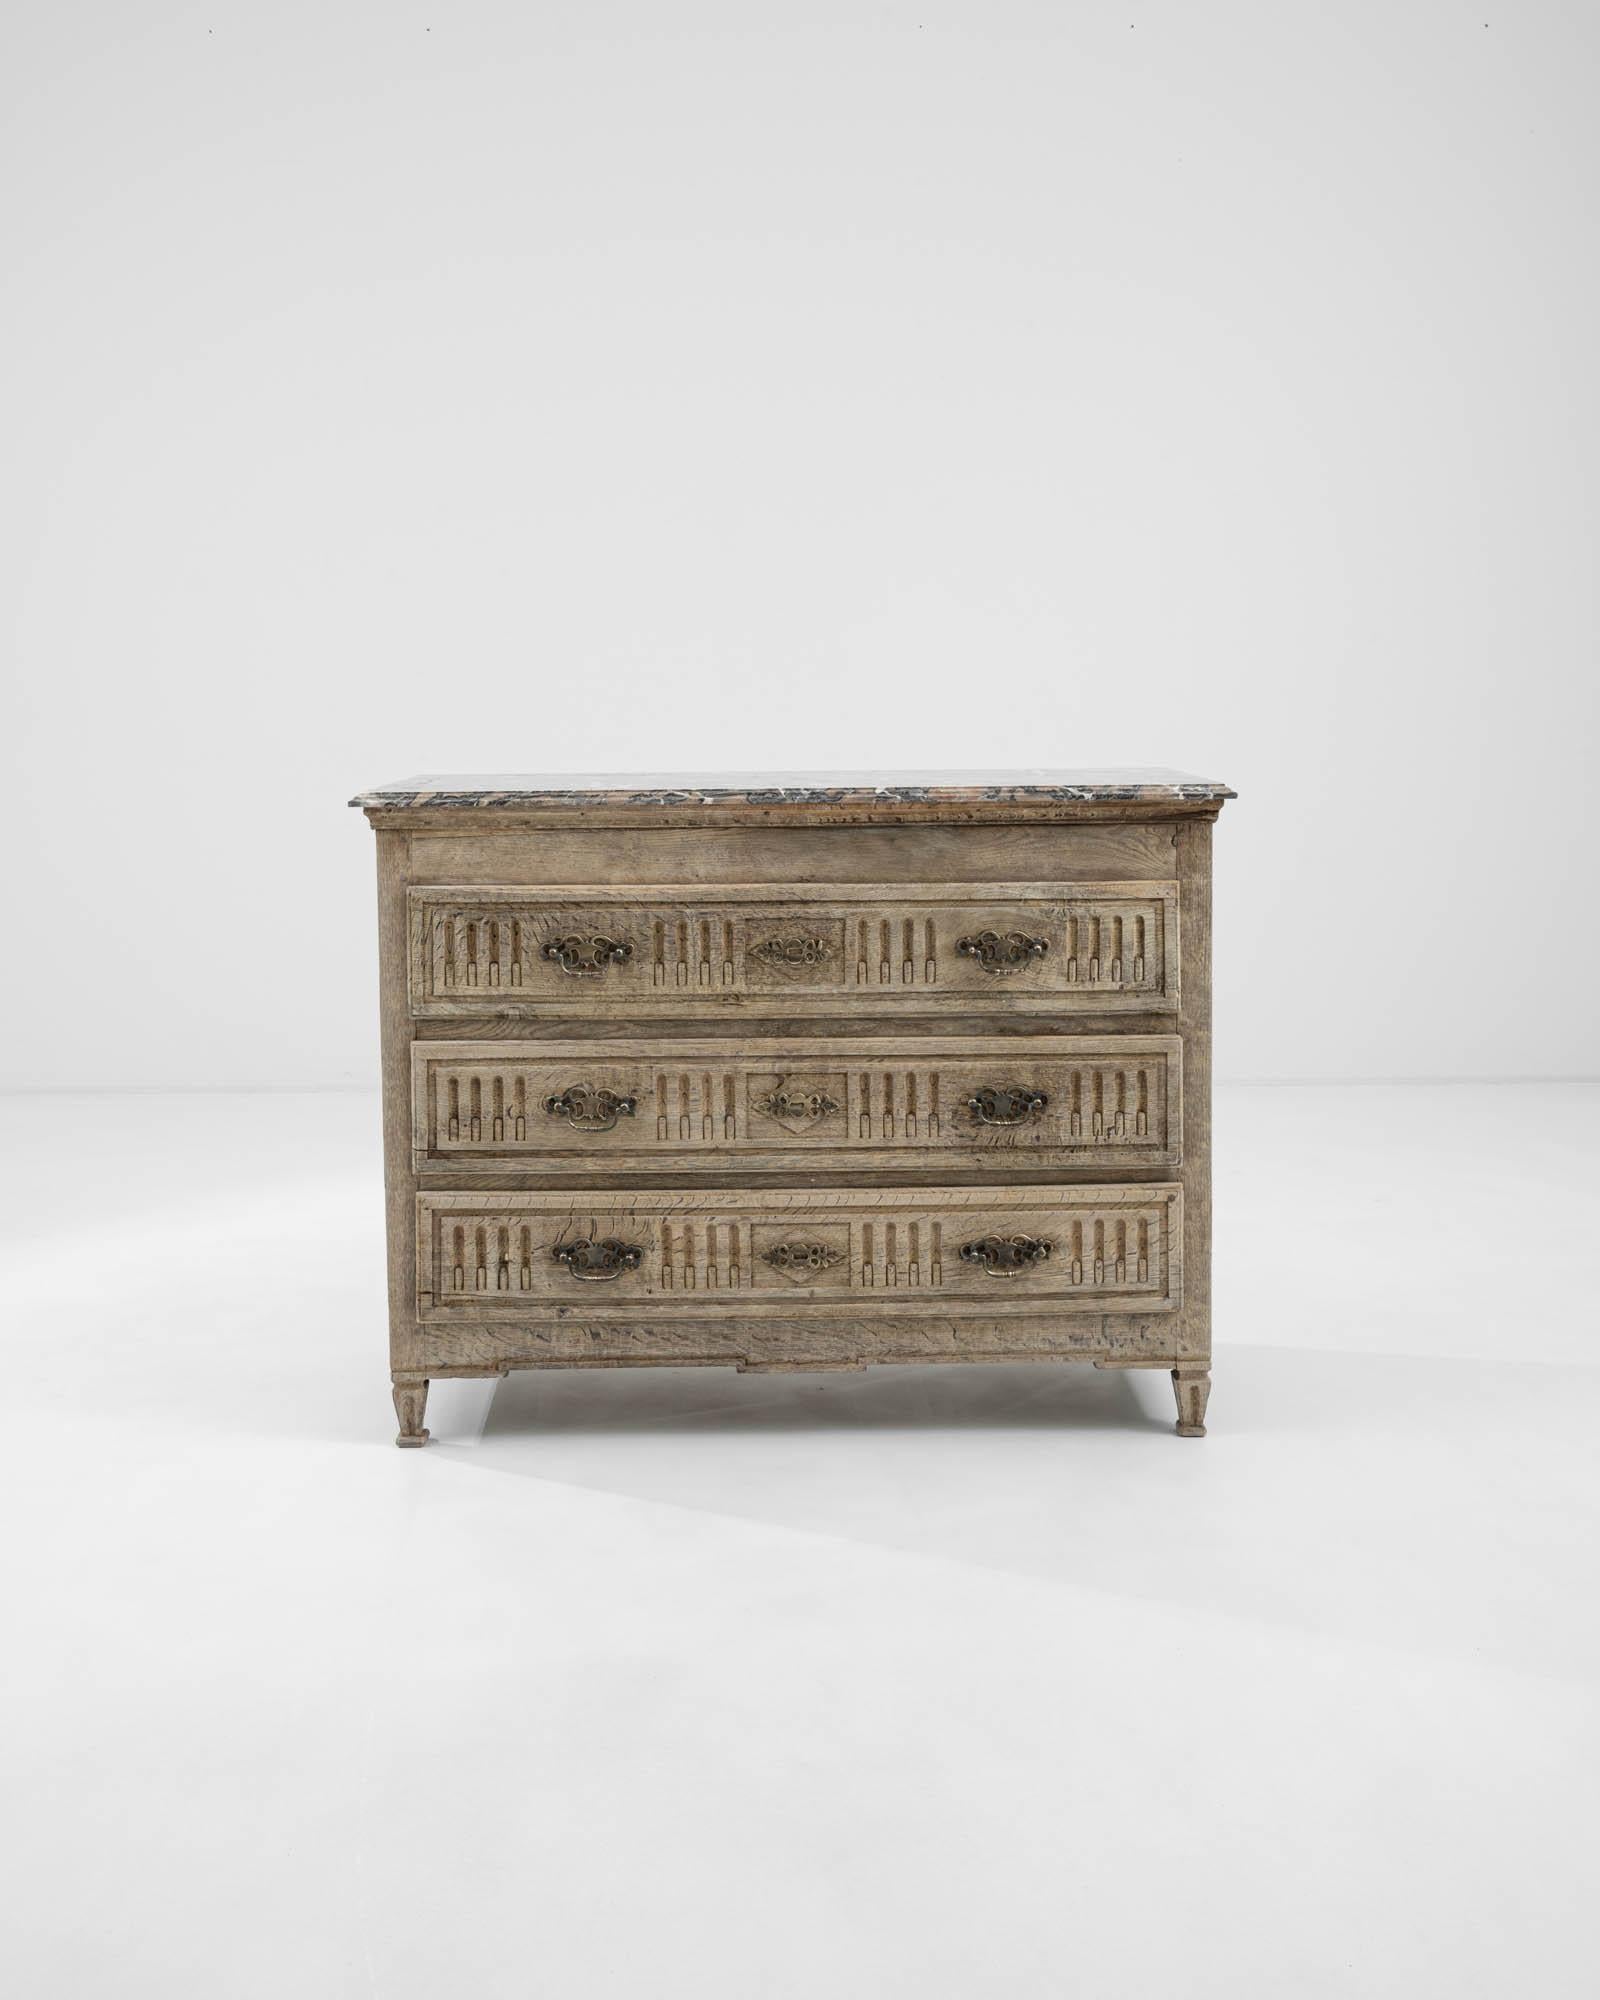 A wooden chest of drawers with a marble top created in France, circa 1900. Ornate and delicately crafted, this antique chest of drawers exudes a sense of classical elegance and studious attention to detail. Diamonds, carved into the side panels,